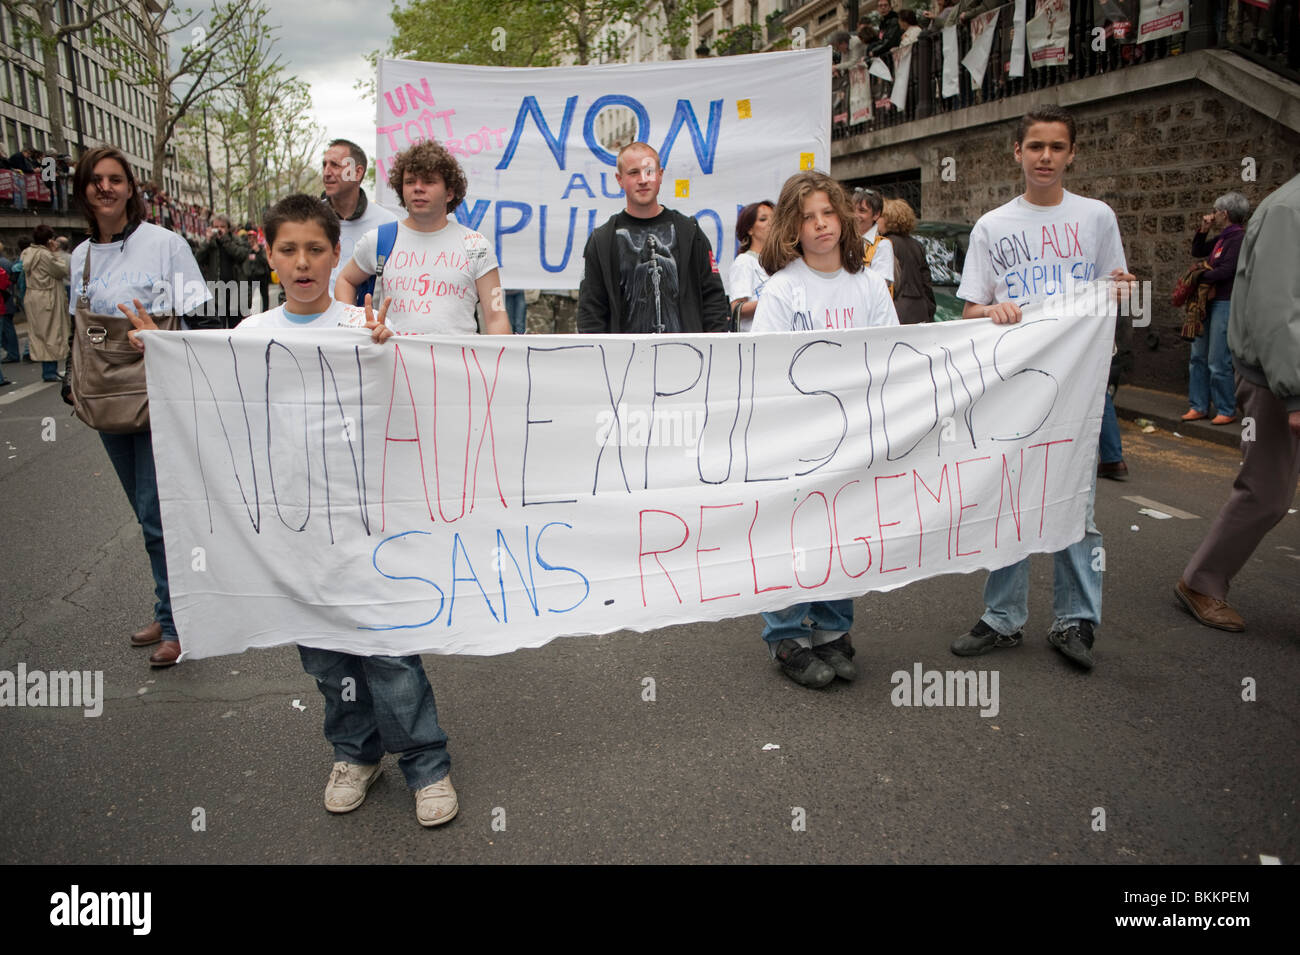 Anti-Expulsion Group Demonstrating in May 1, May Day Demonstration, Paris, France, teenagers outside urban, young people protesting Stock Photo